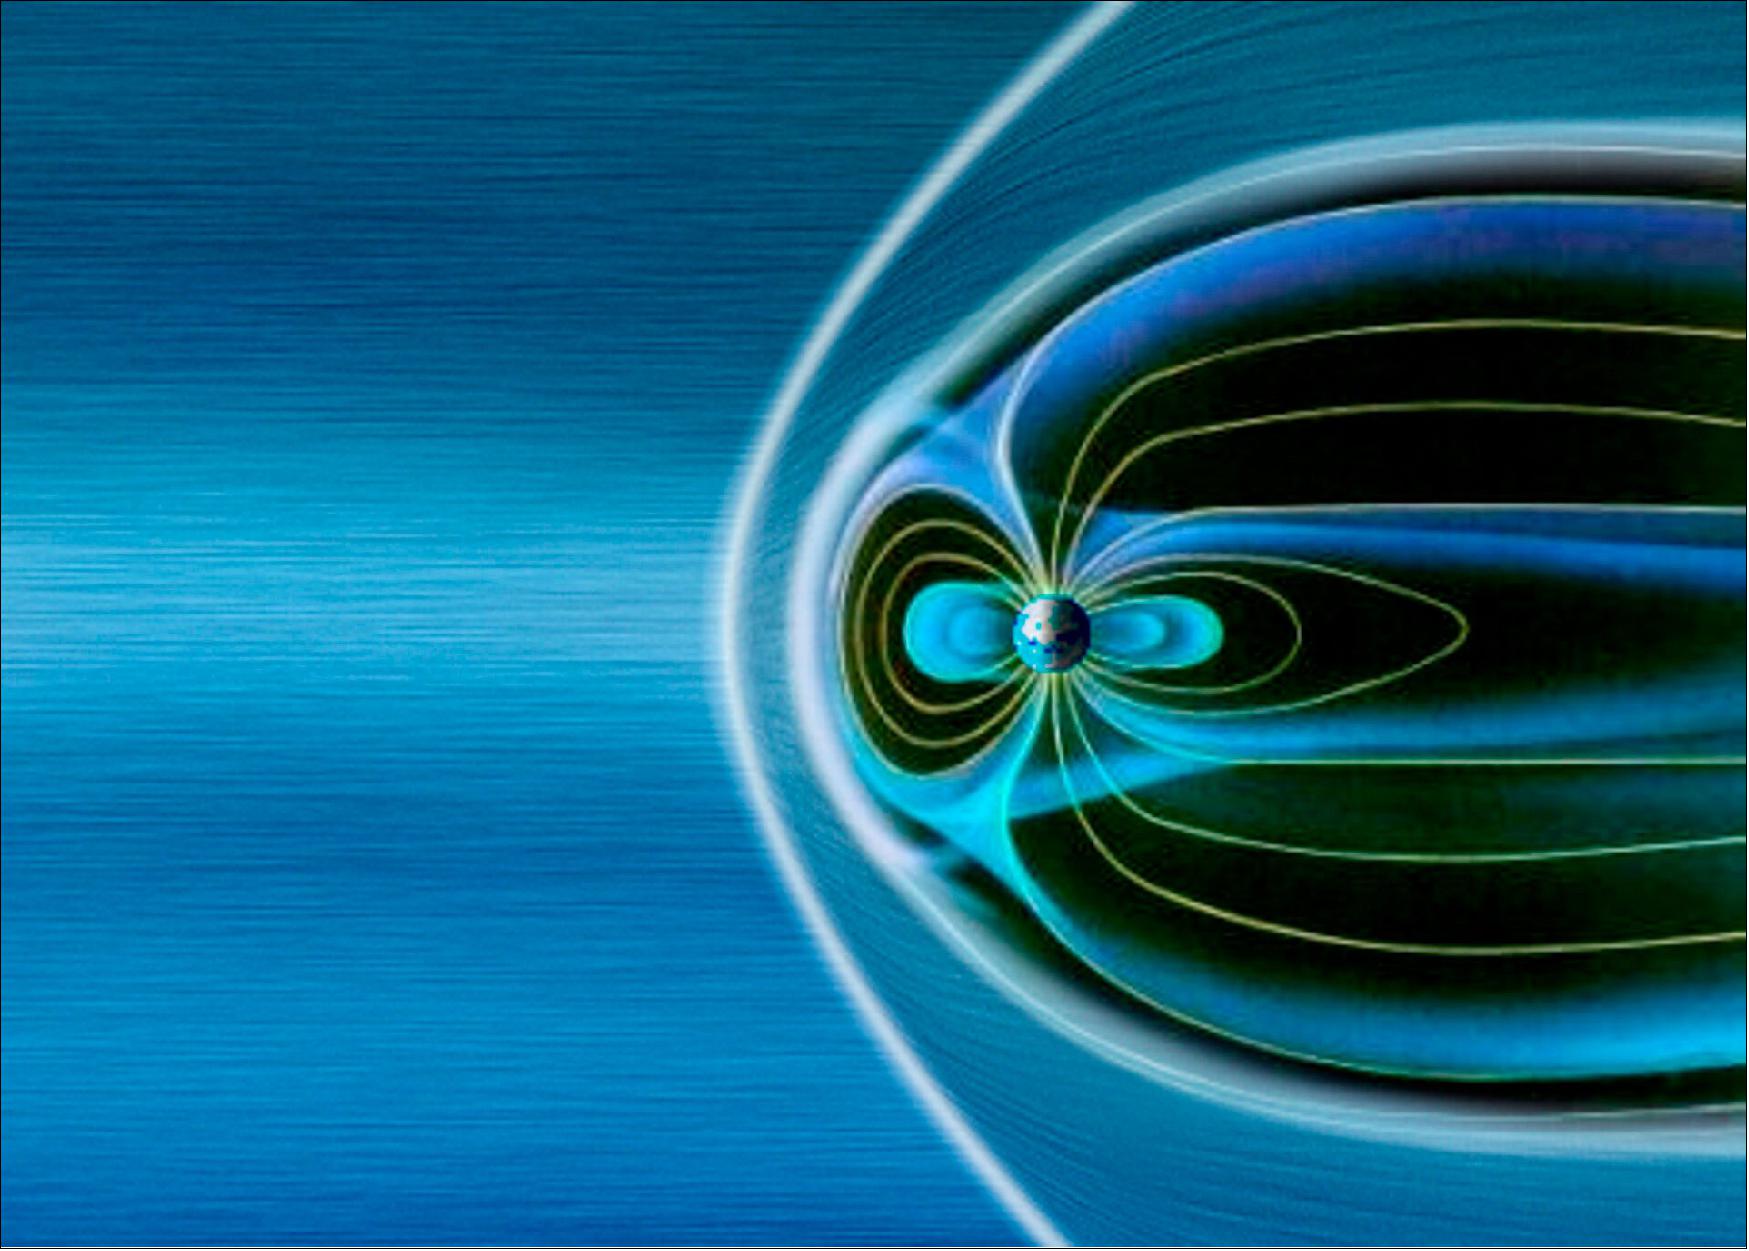 Figure 12: Earth's bow shock and magnetosphere. This artist's impression shows Earth's bow shock, a standing shockwave that forms when the solar wind meets our planet's magnetosphere (image credit: ESA/AOES Medialab)